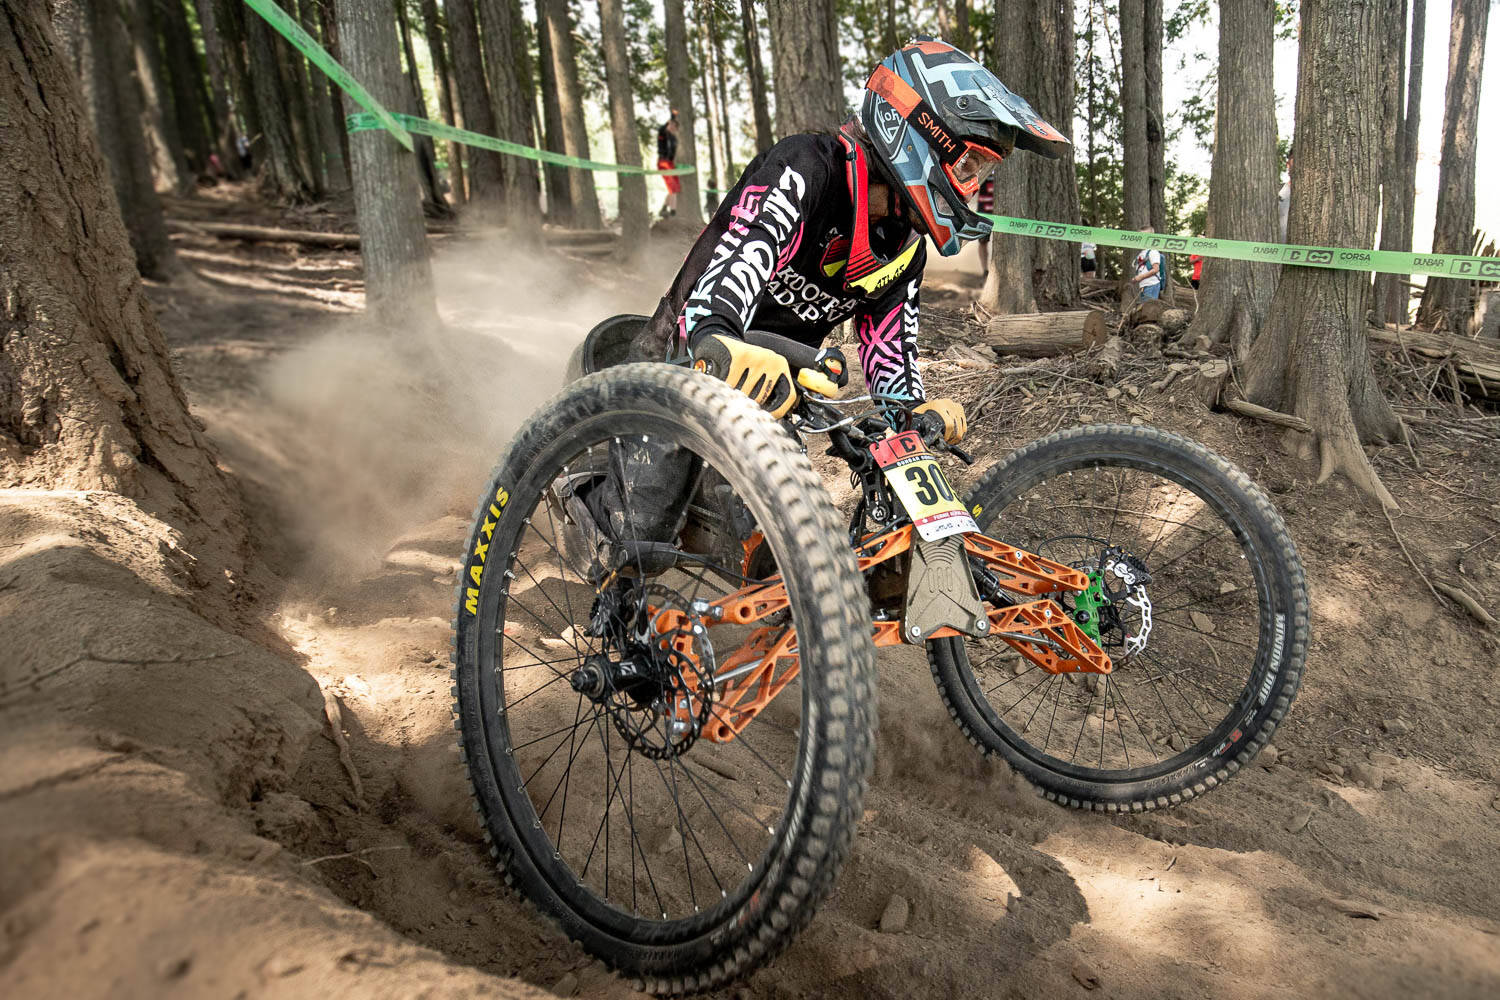 Adaptive mountain biking races made their debut at the Dunbar Series in 2020, which also hosts the Canadian Nationals. Races took place at Panorama and Fernie, BC. Photo Courtesy Kootenay Adaptive Sport Association/Niall Pinder.